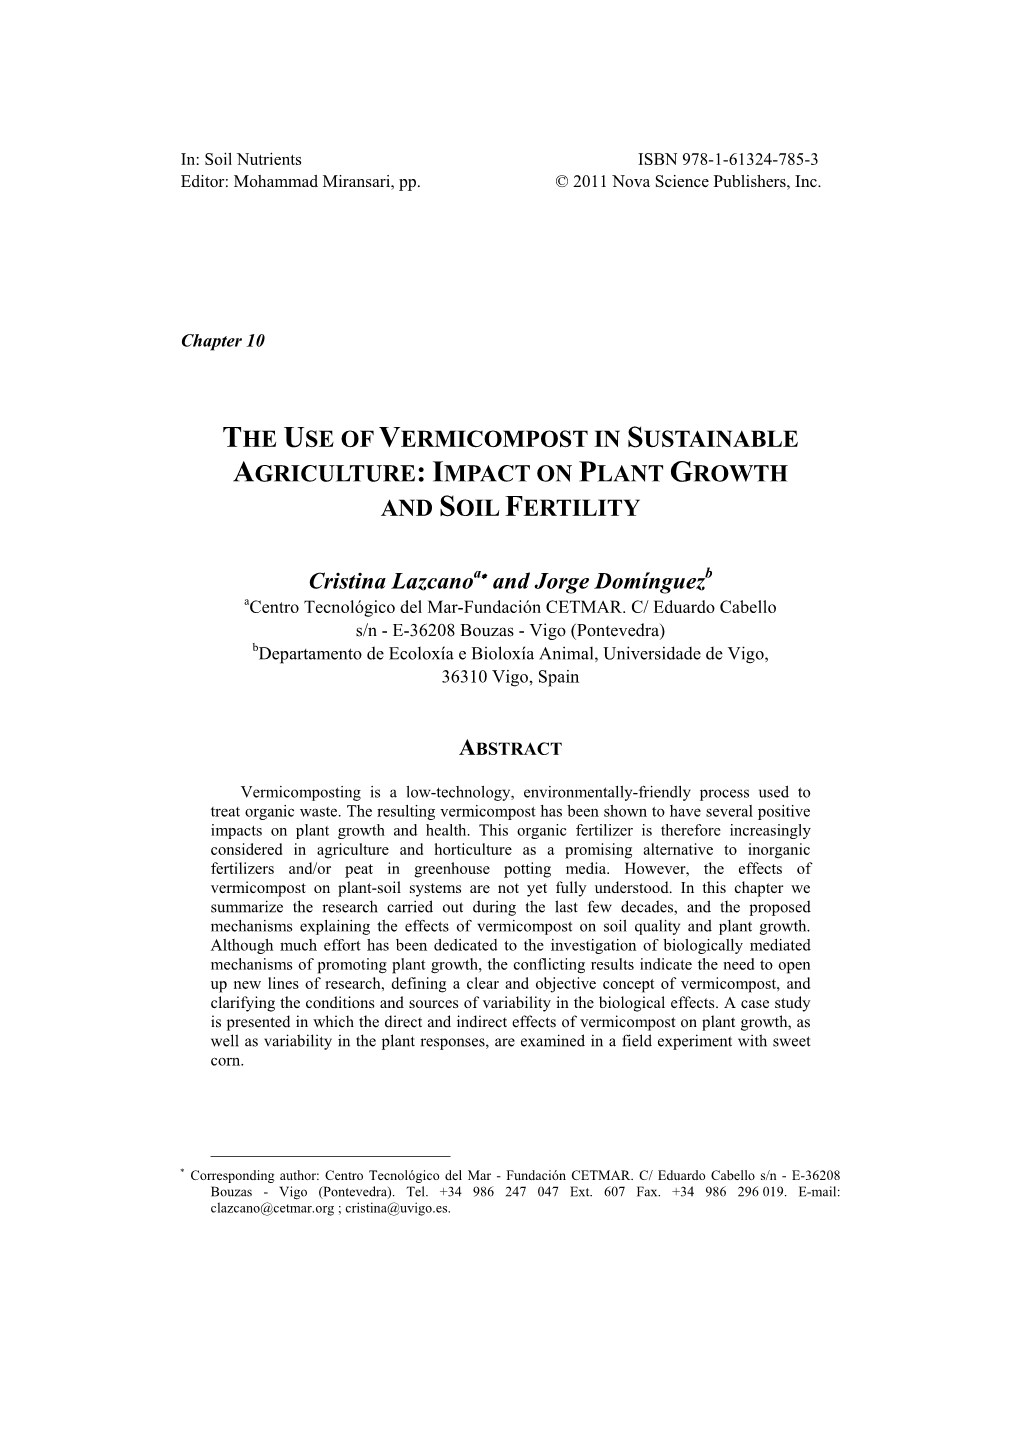 The Use of Vermicompost in Sustainable Agriculture: Impact on Plant Growth and Soil Fertility